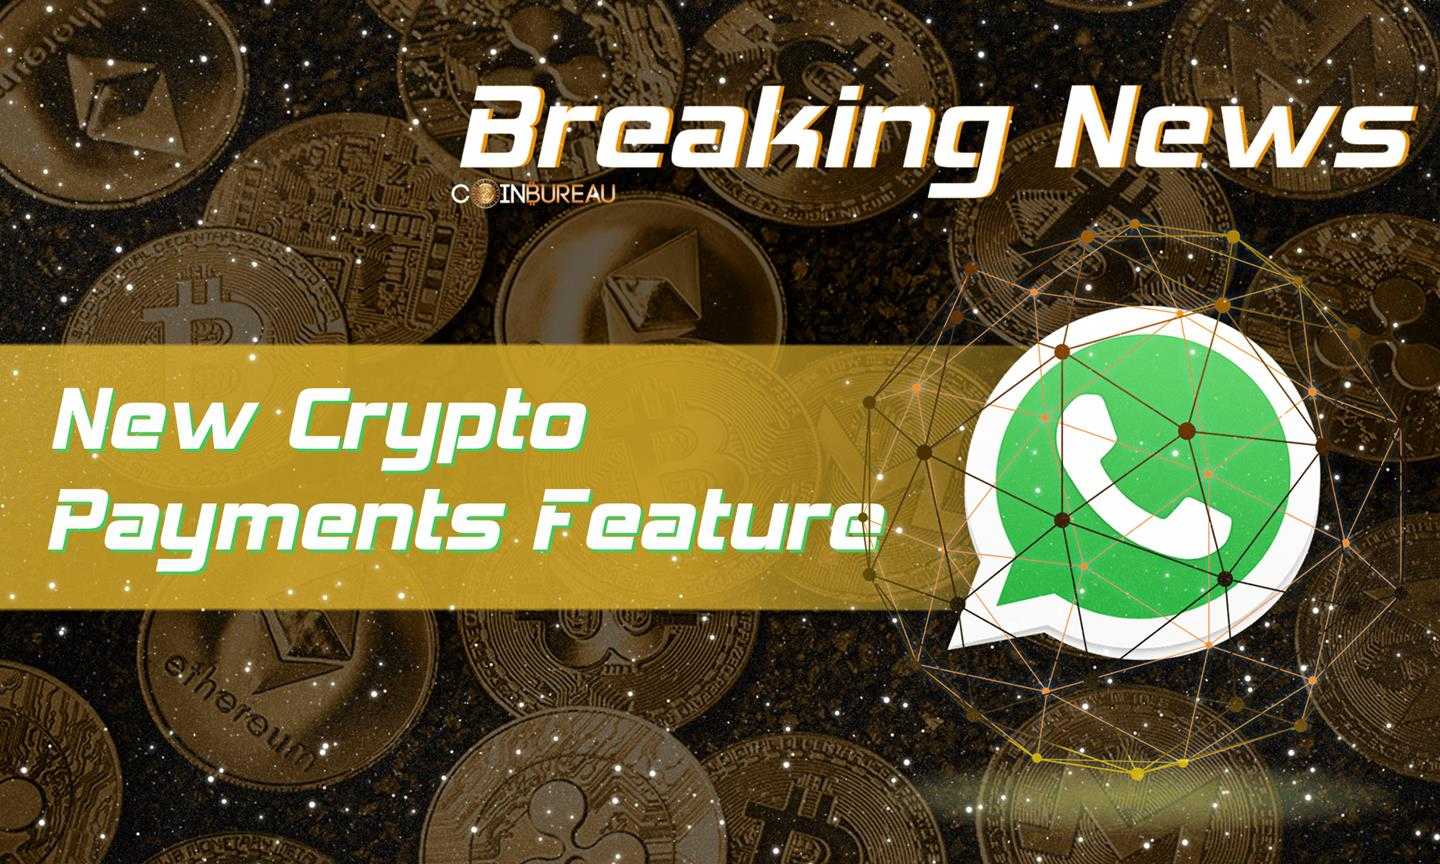 WhatsApp Tests Out New Crypto Payments Feature